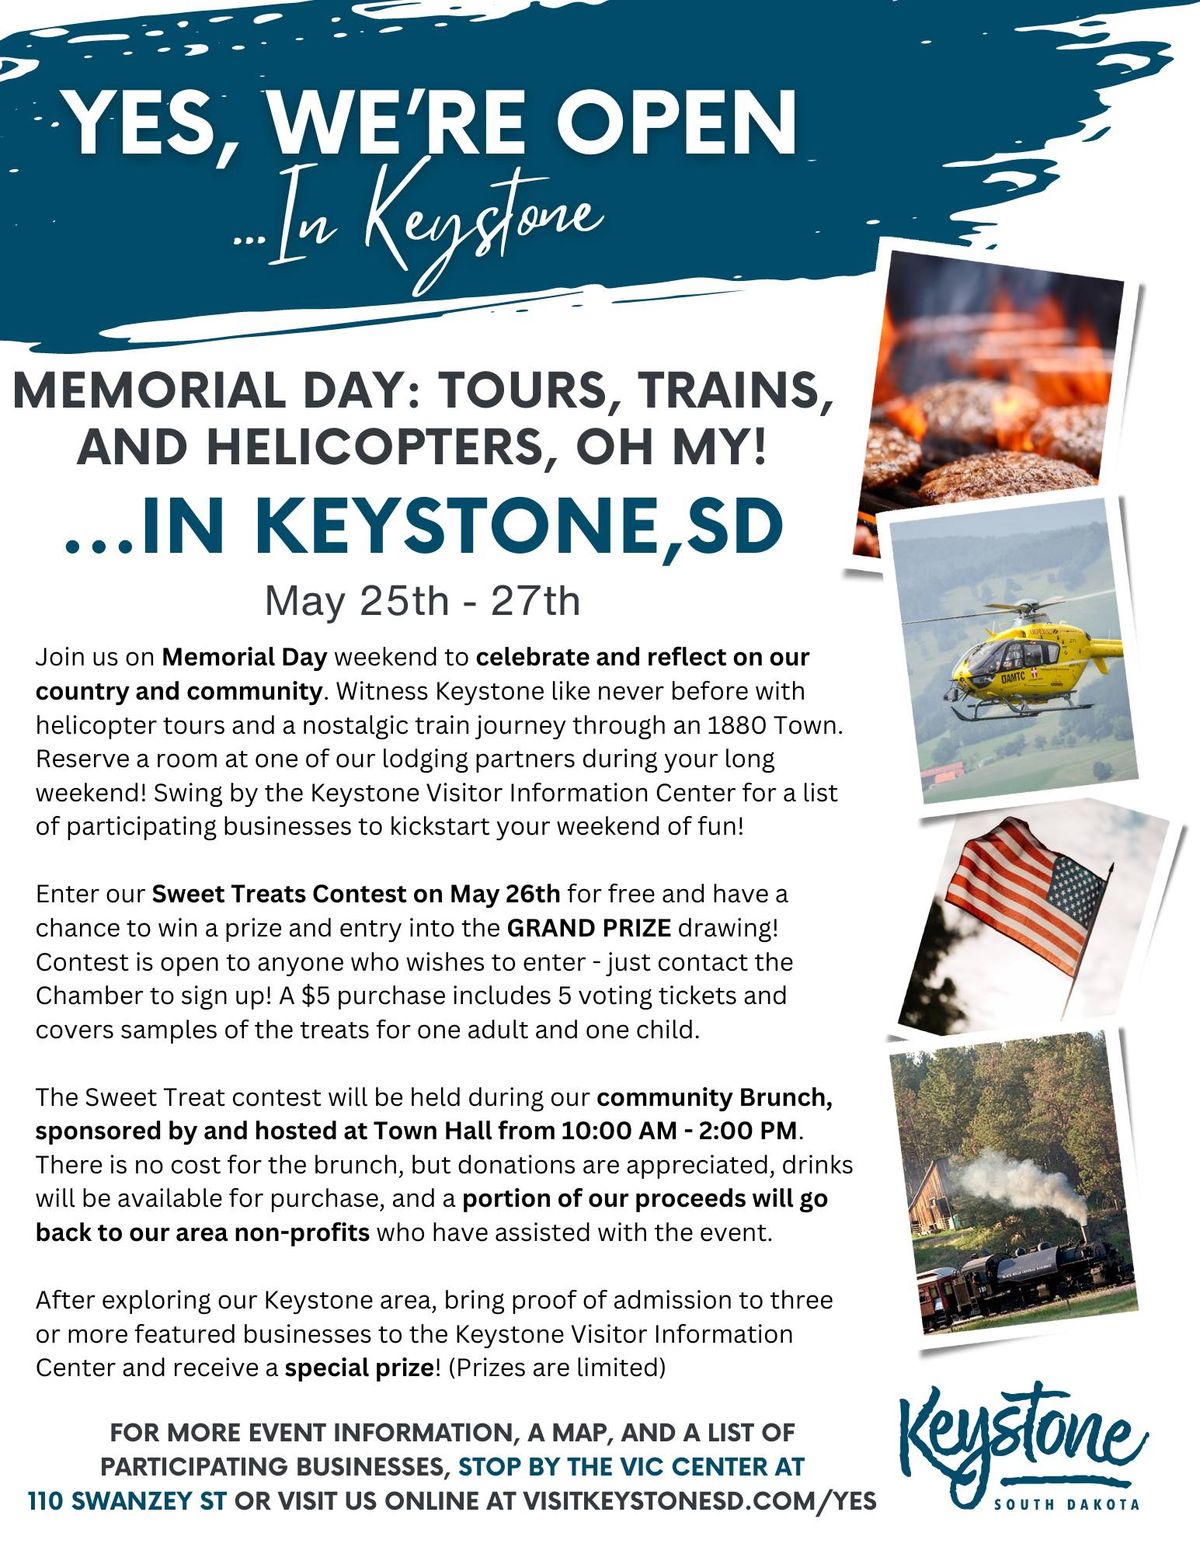 Yes, We're Open...Memorial Day: Tours, Trains, and Helicopters, Oh My...In Keystone, SD